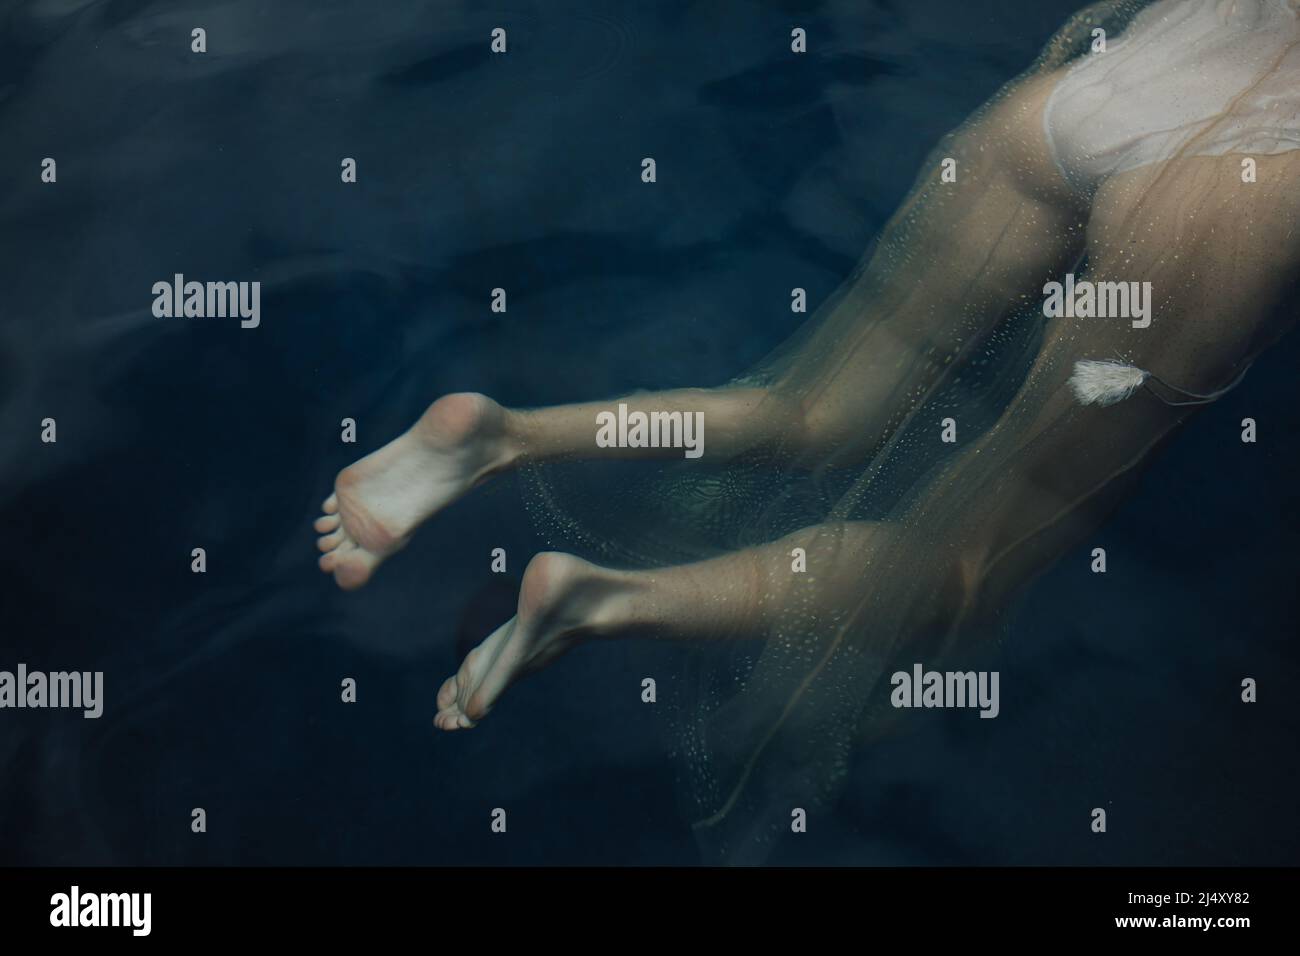 Legs And Butt Floating Underwater Wearing Sparkly Dress Stock Photo Alamy